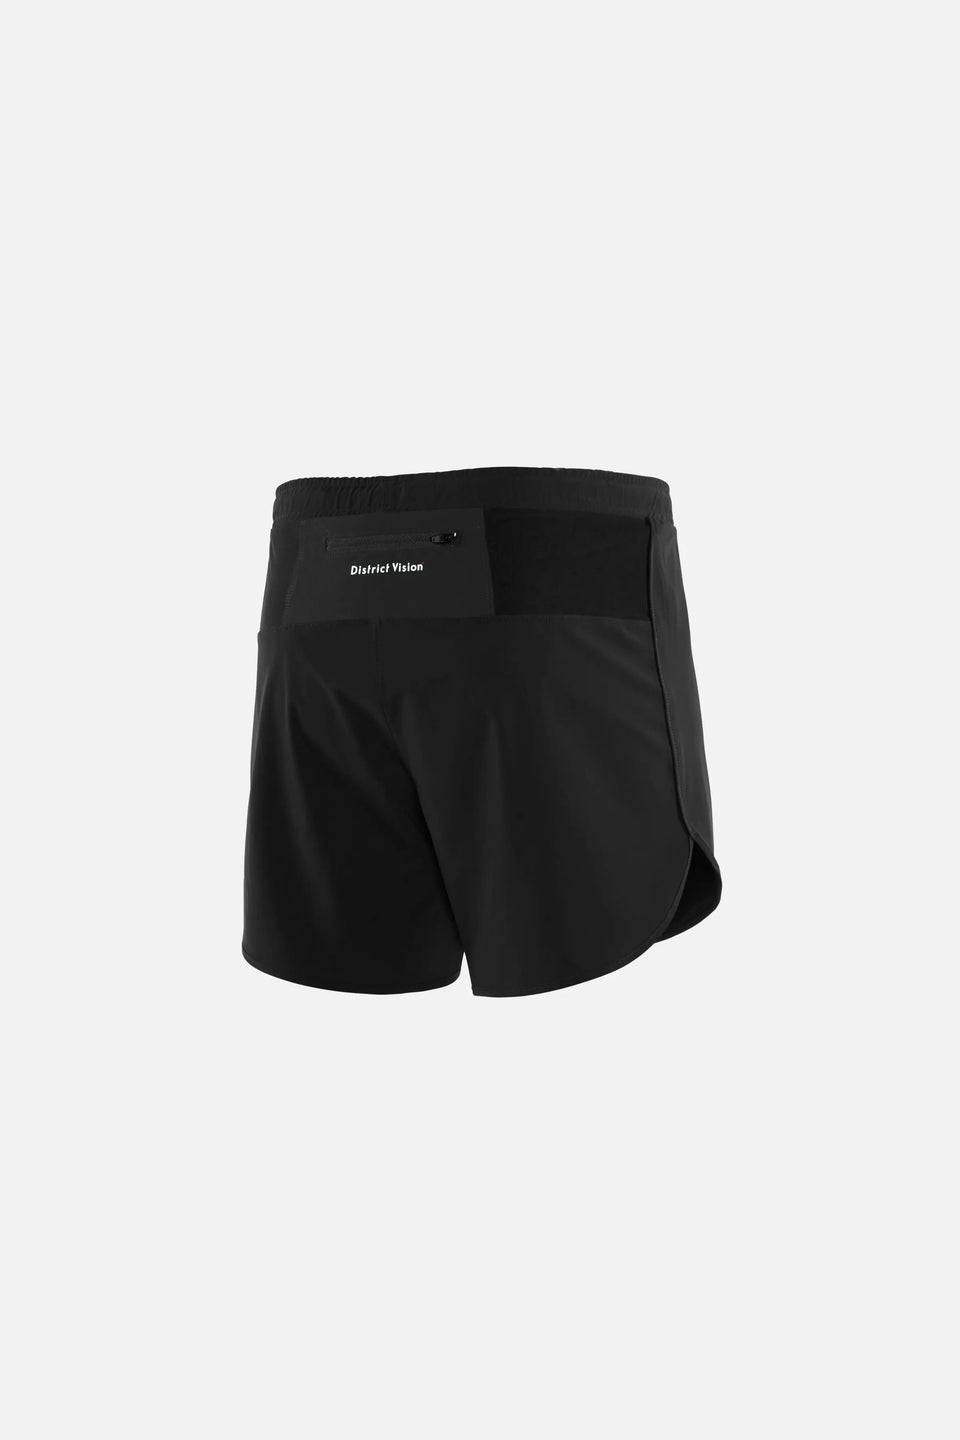 District Vision SS23 Spino 5" Training Shorts Black Calculus Victoria BC Canada